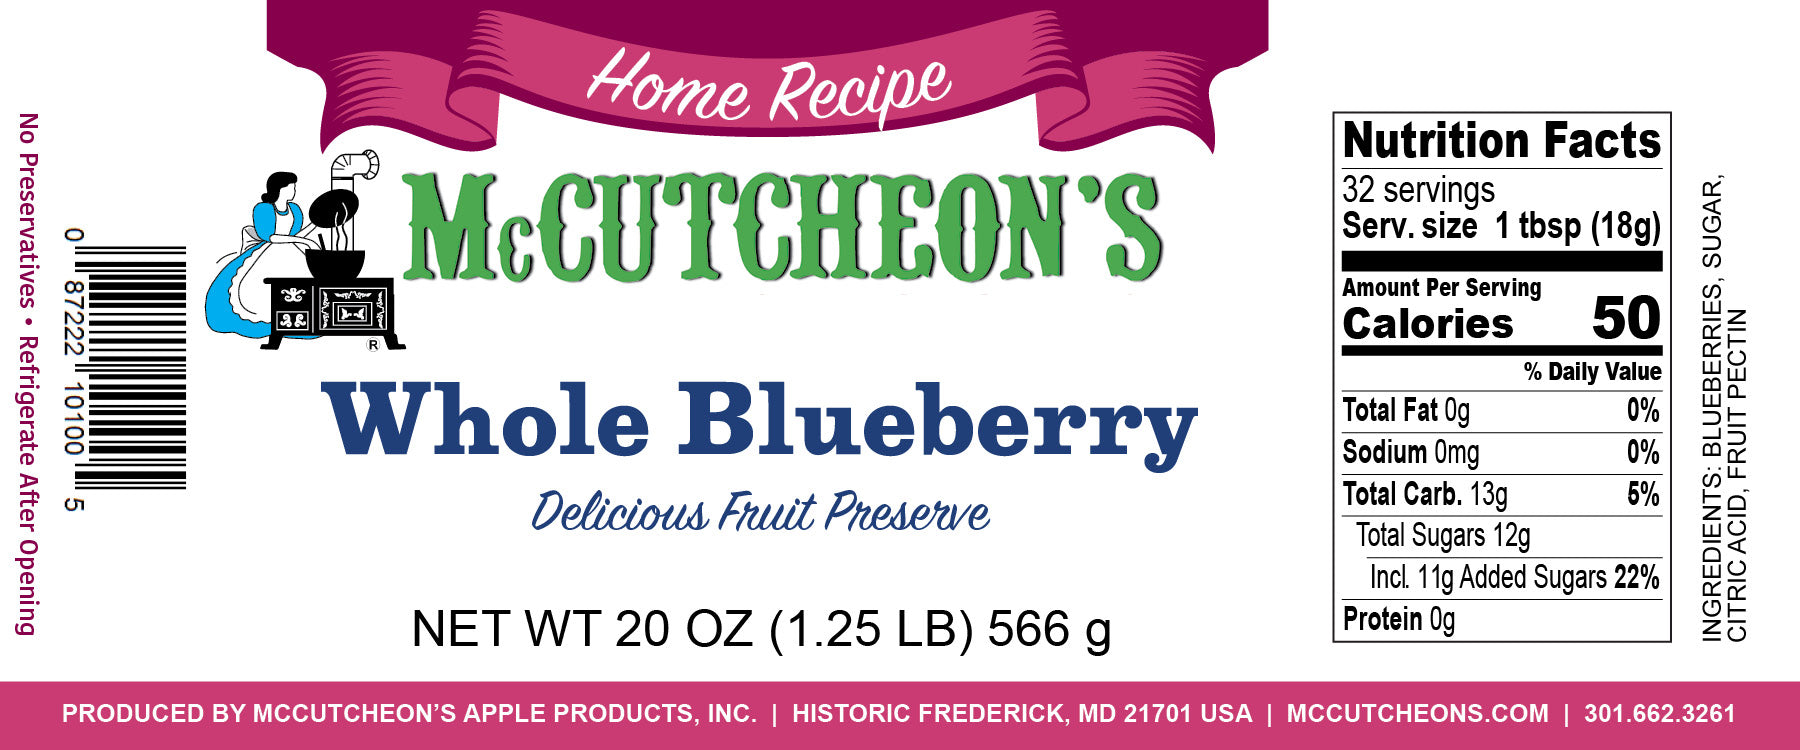 nutritional label for McCutcheon's whole blueberry preserves